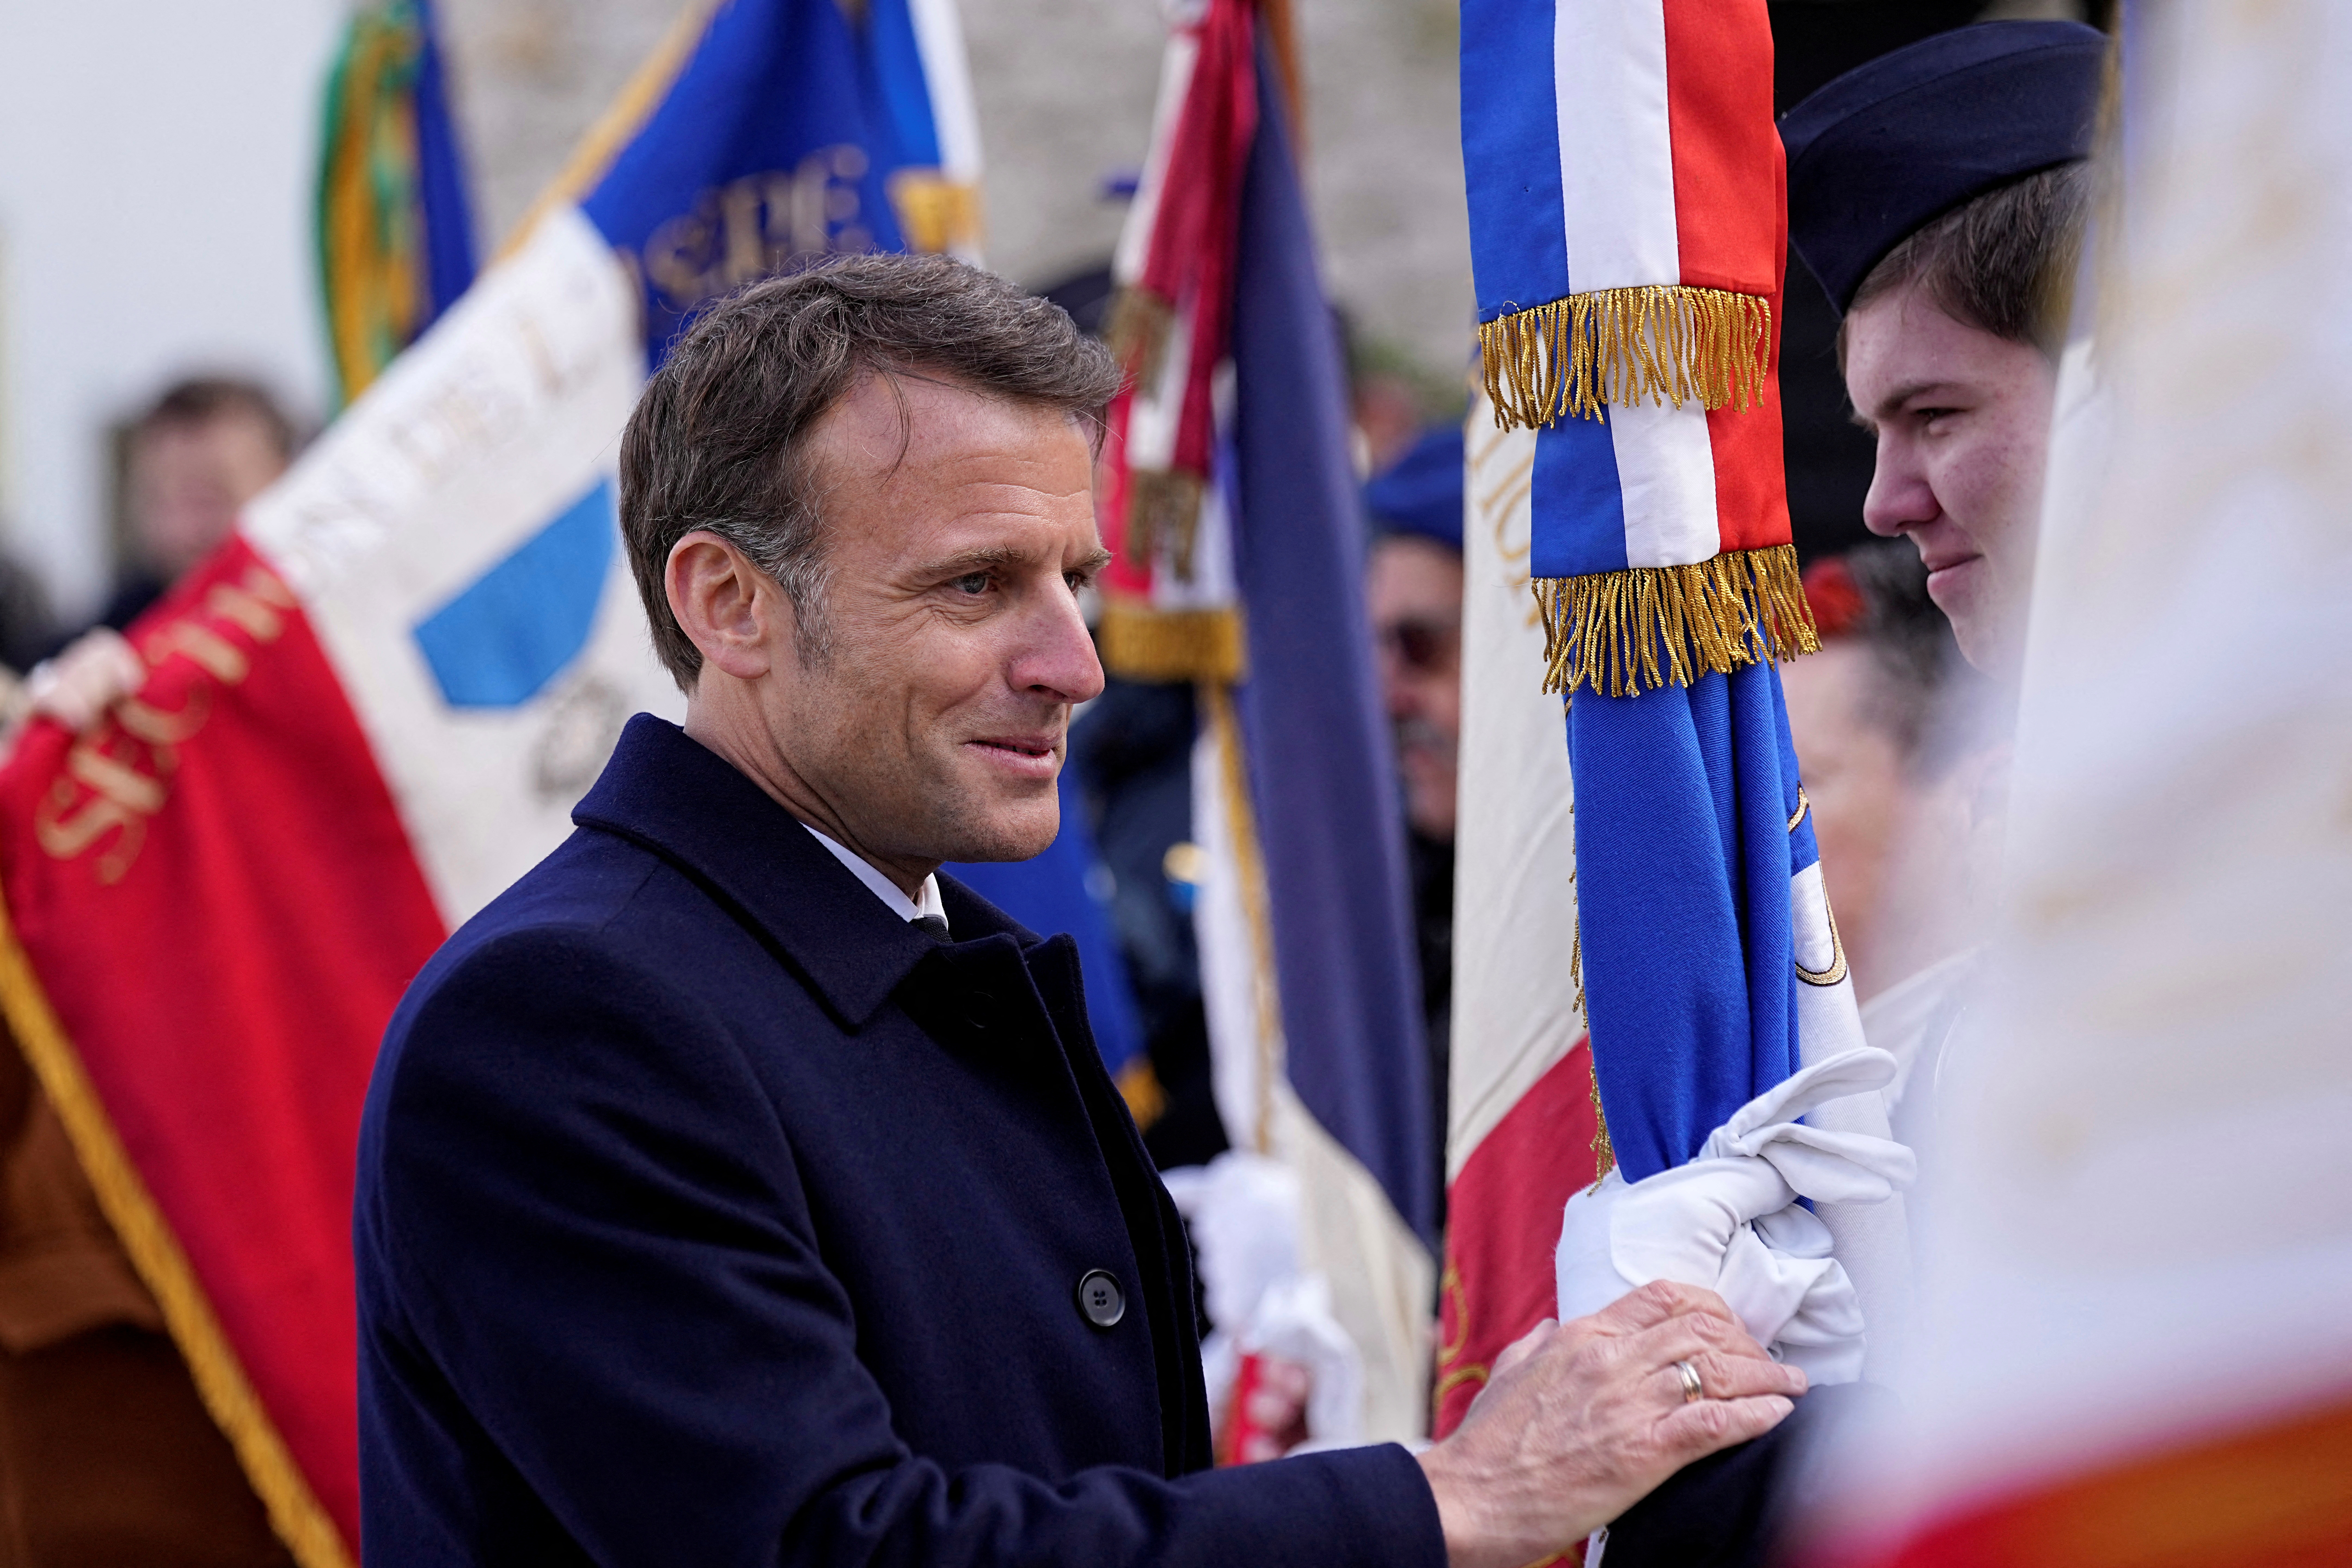 President Macron pays homage to the local Resistance during WWII as part of the 80th anniversary of the liberation of Nazi occupied France